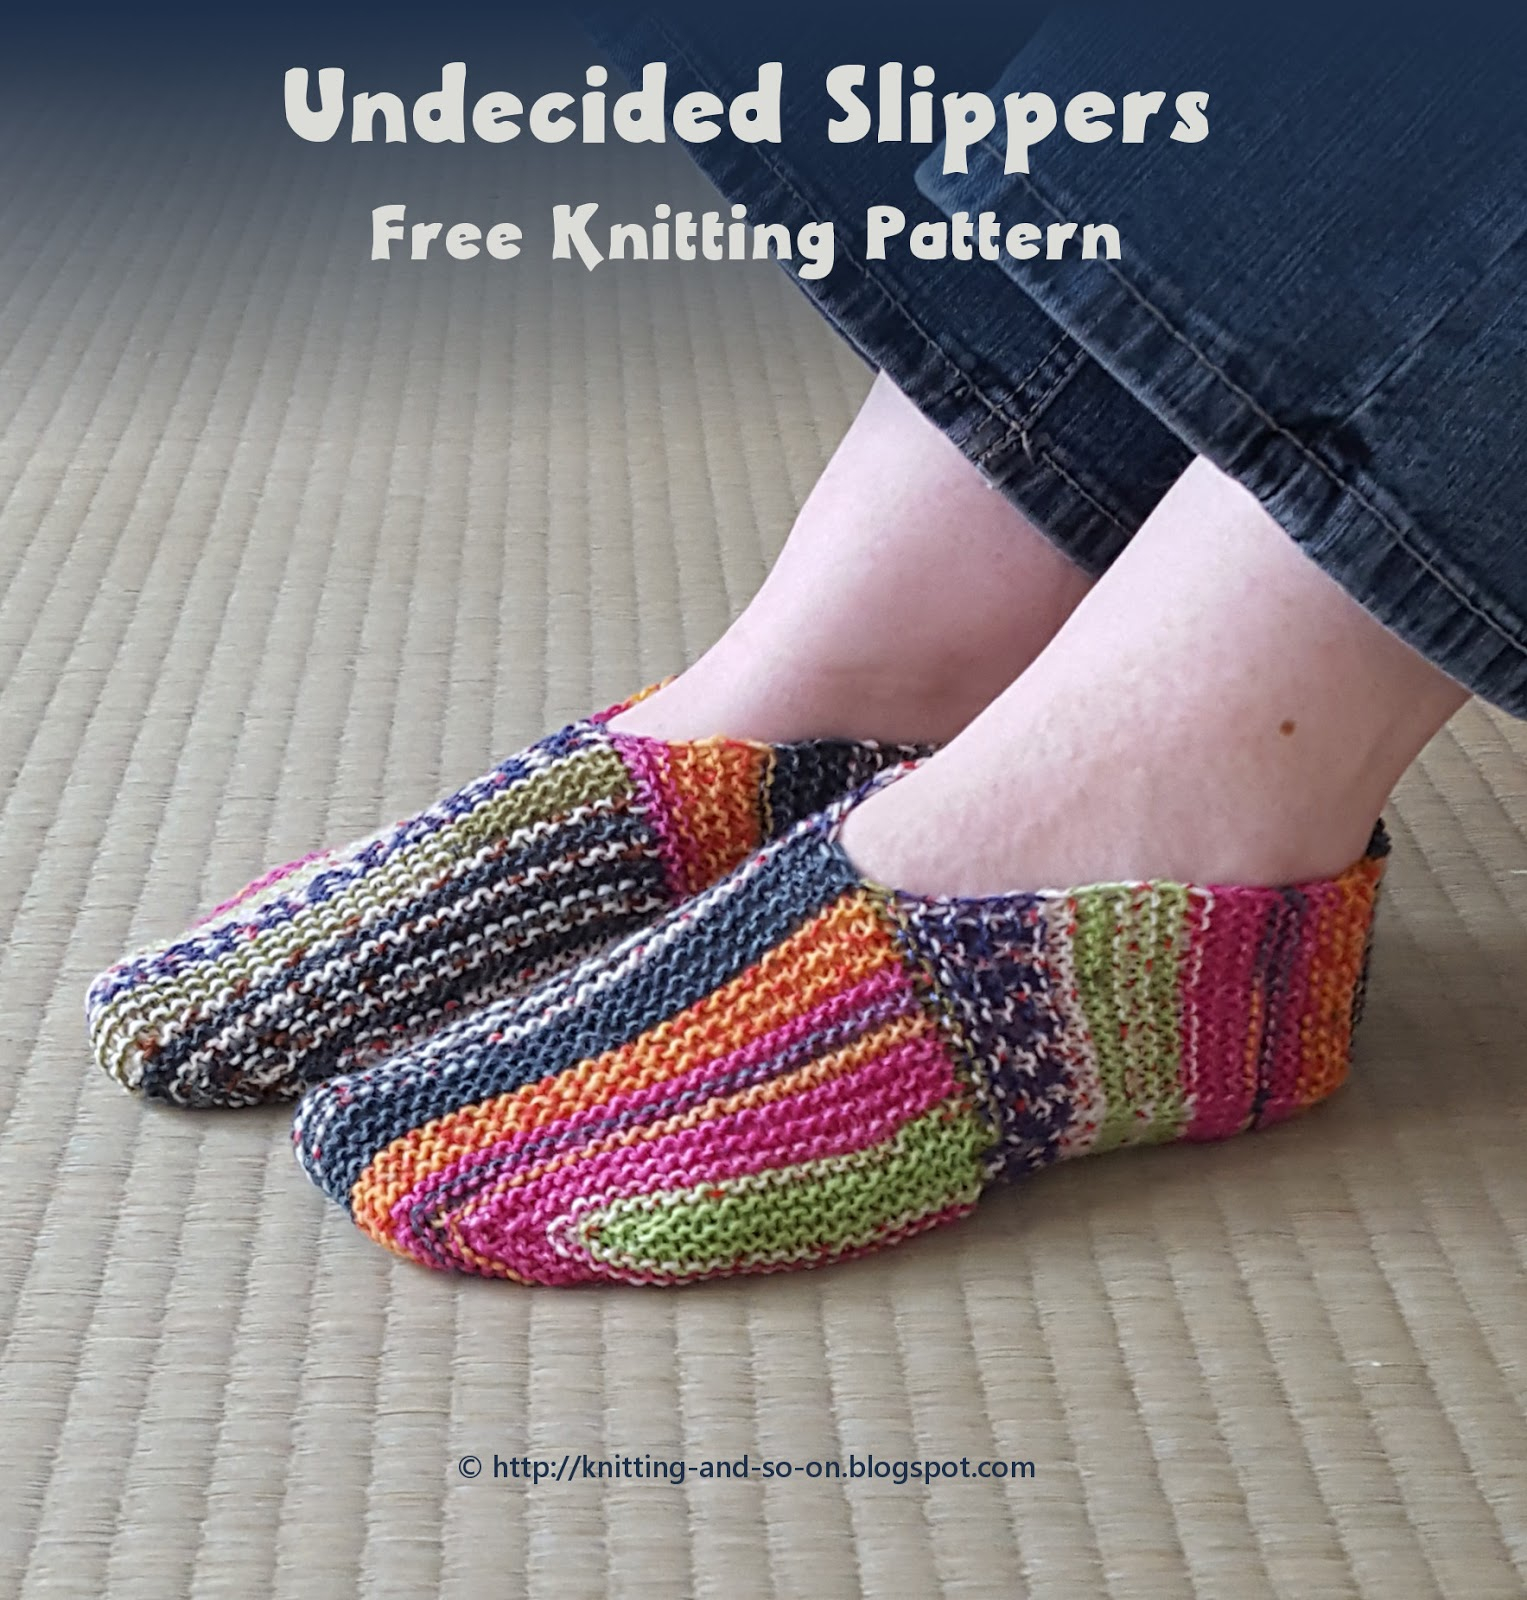 Free Knit Slipper Pattern Knitting And So On Undecided Slippers